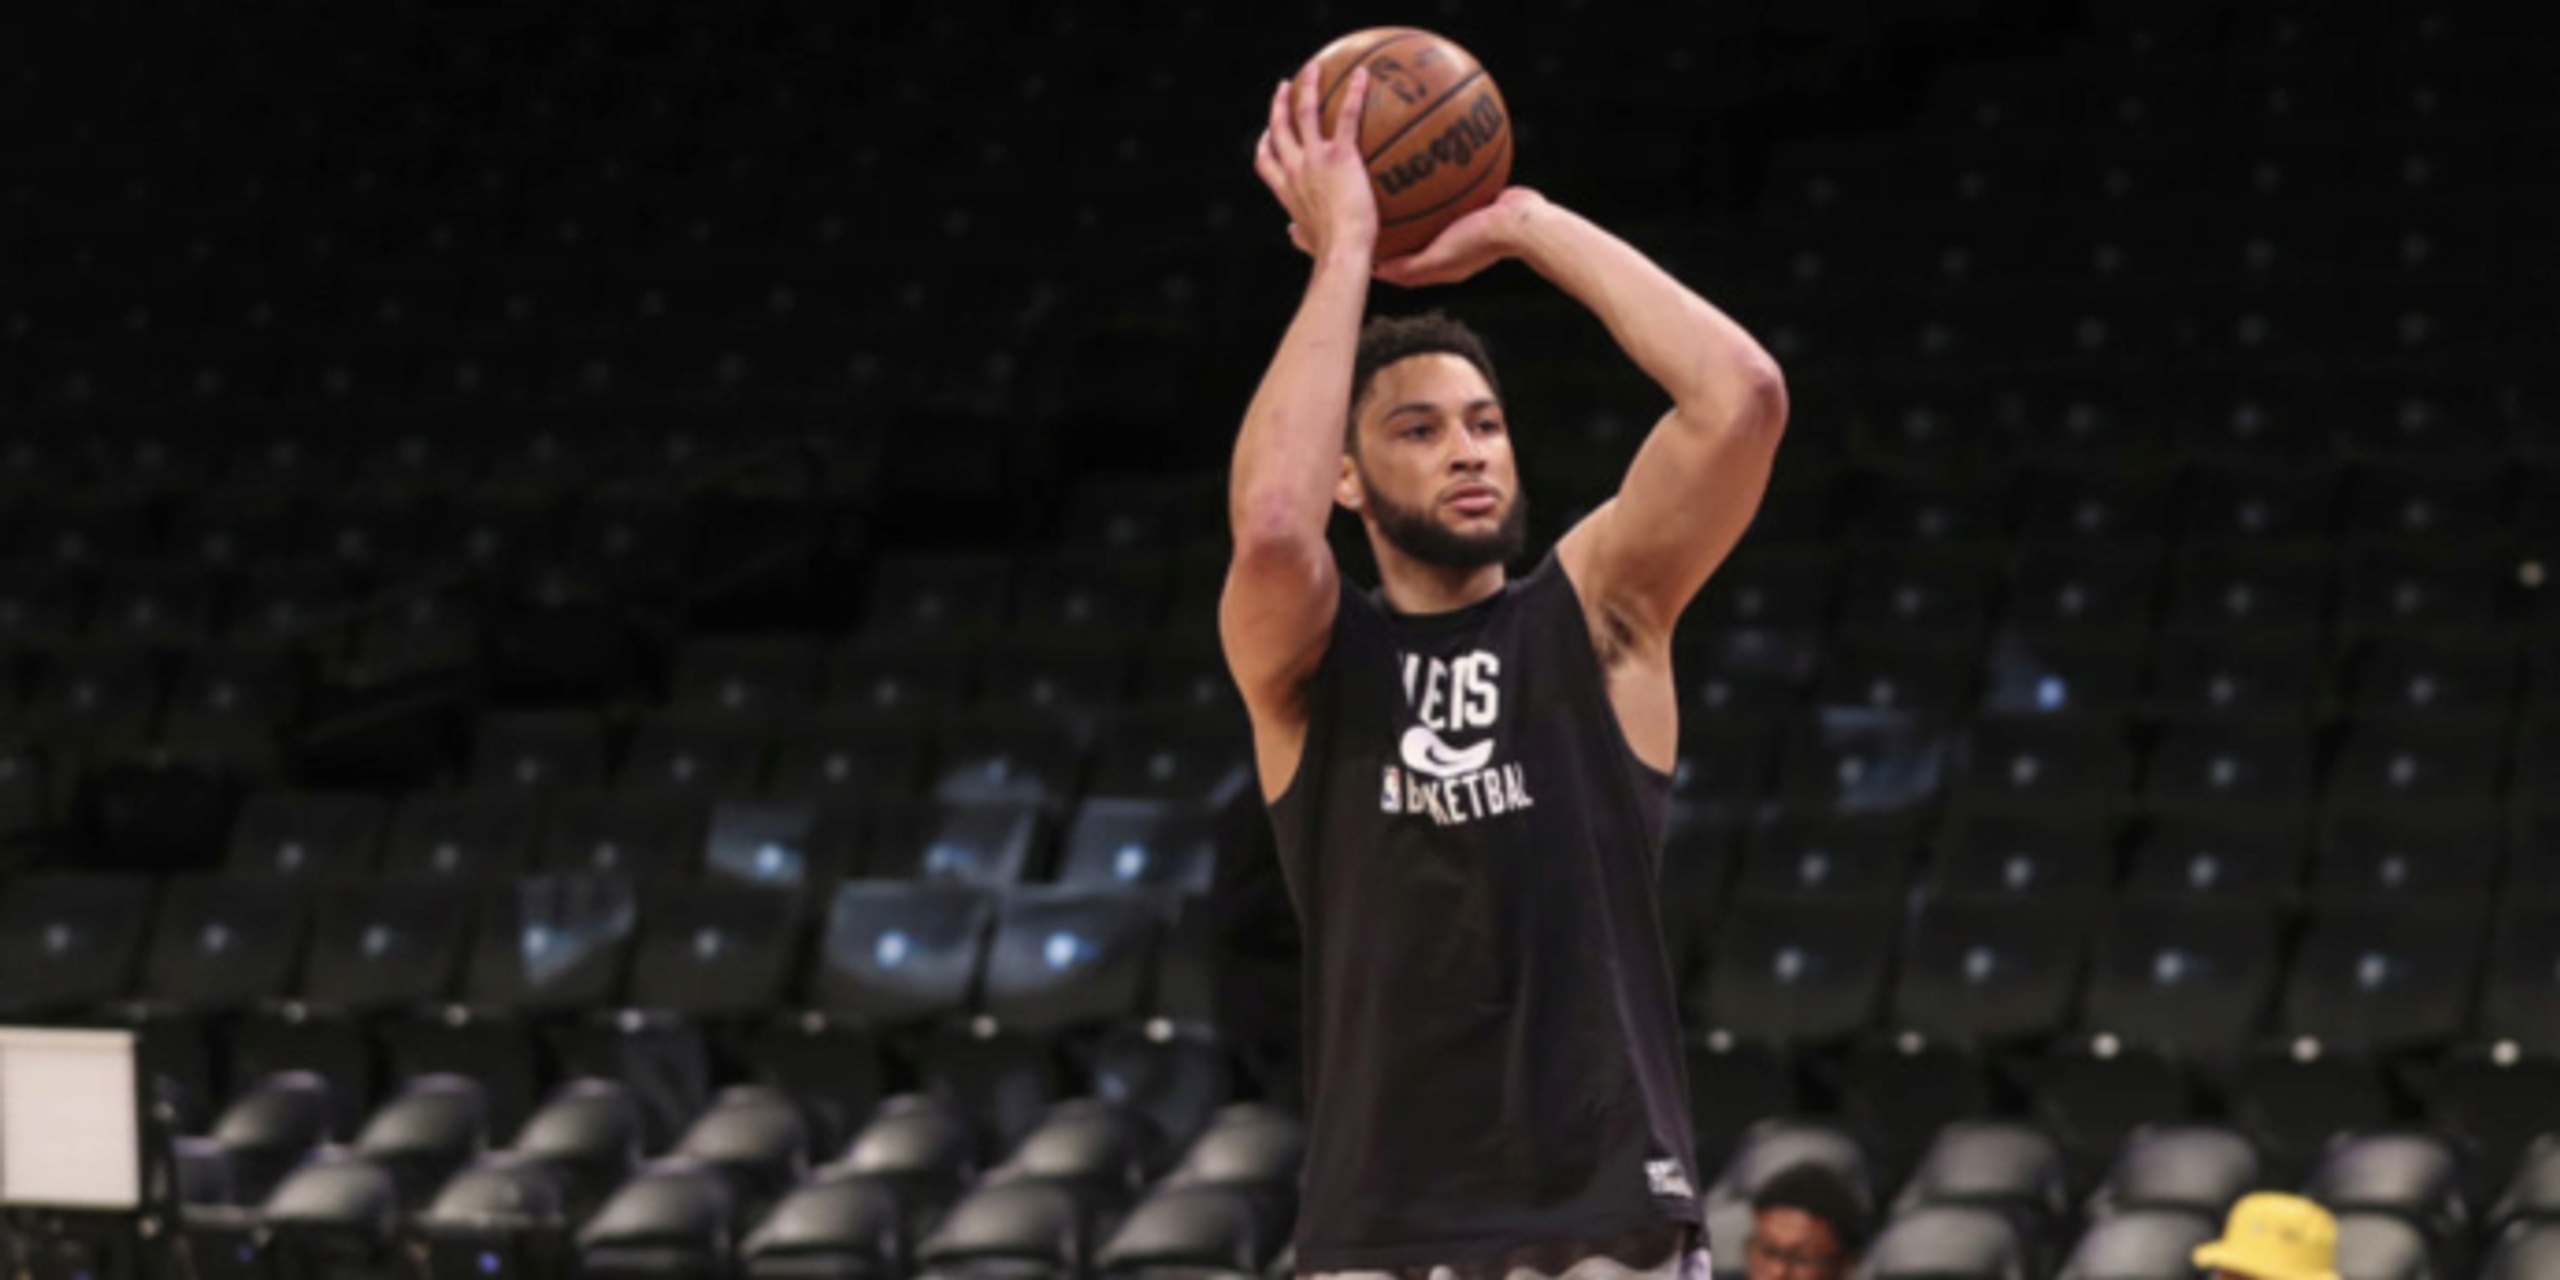 Ben Simmons has successful back surgery, Nets announce